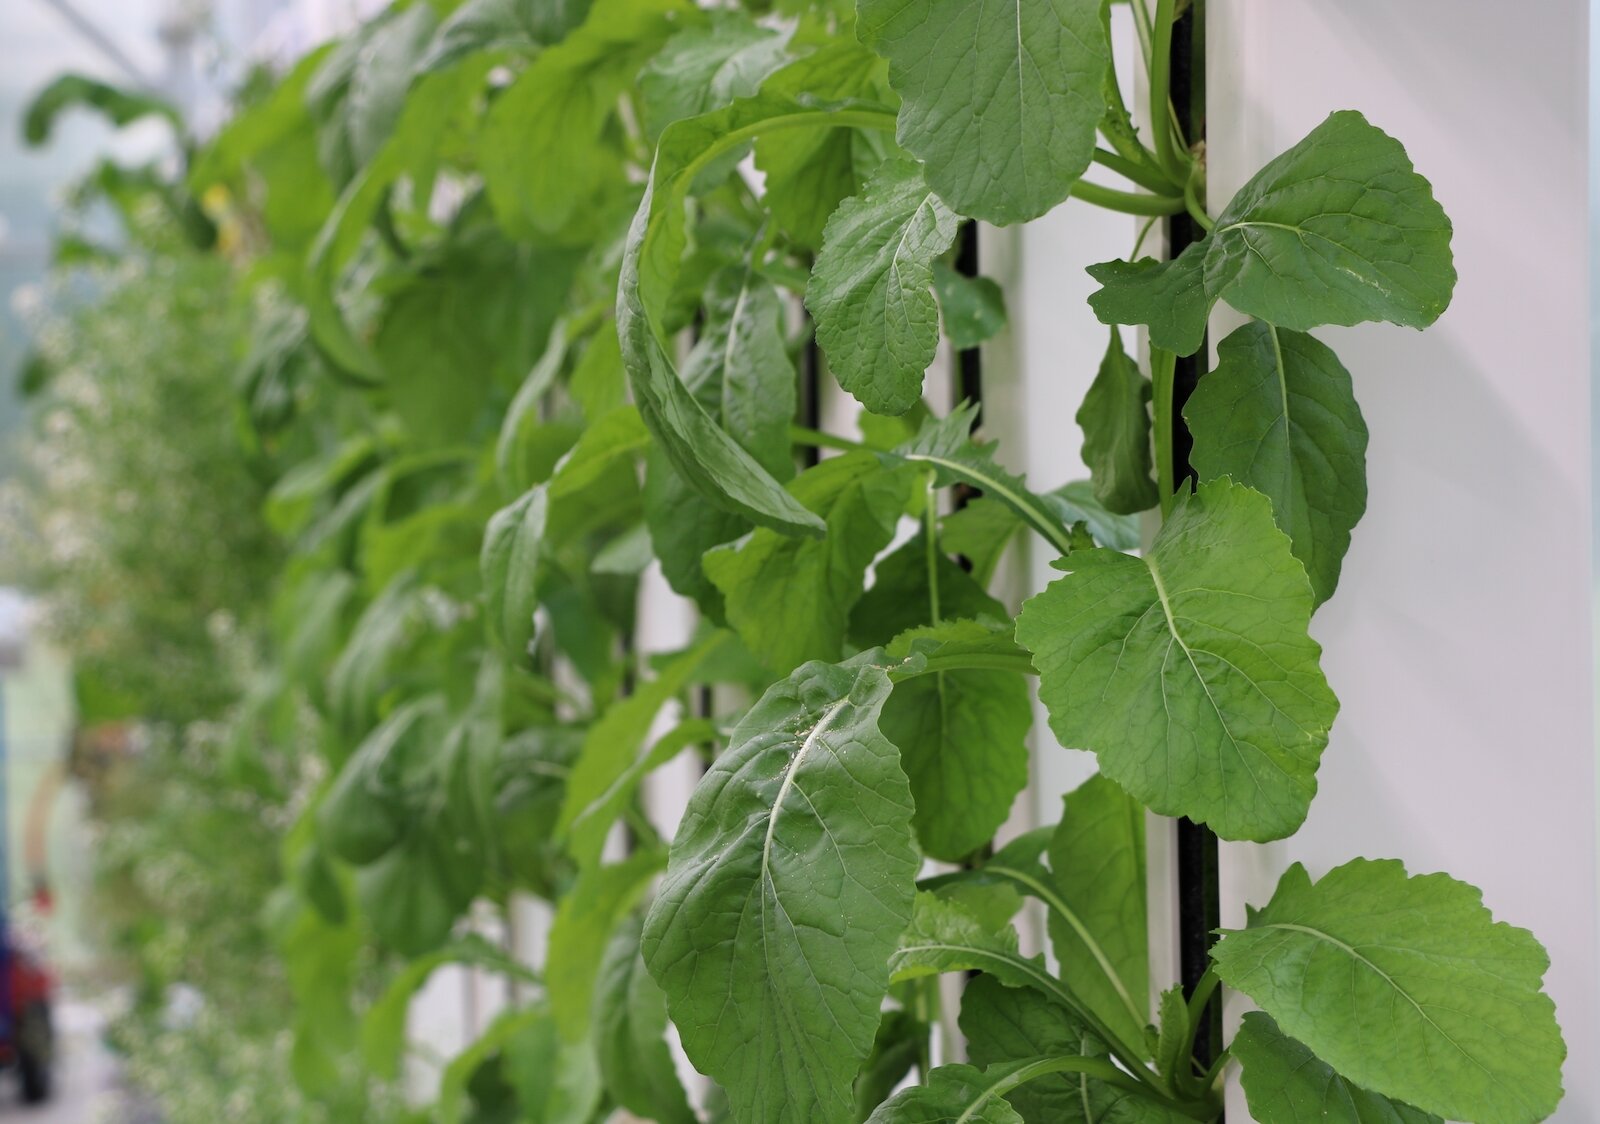 “Farm walls” provide a space-efficient way of growing food. 